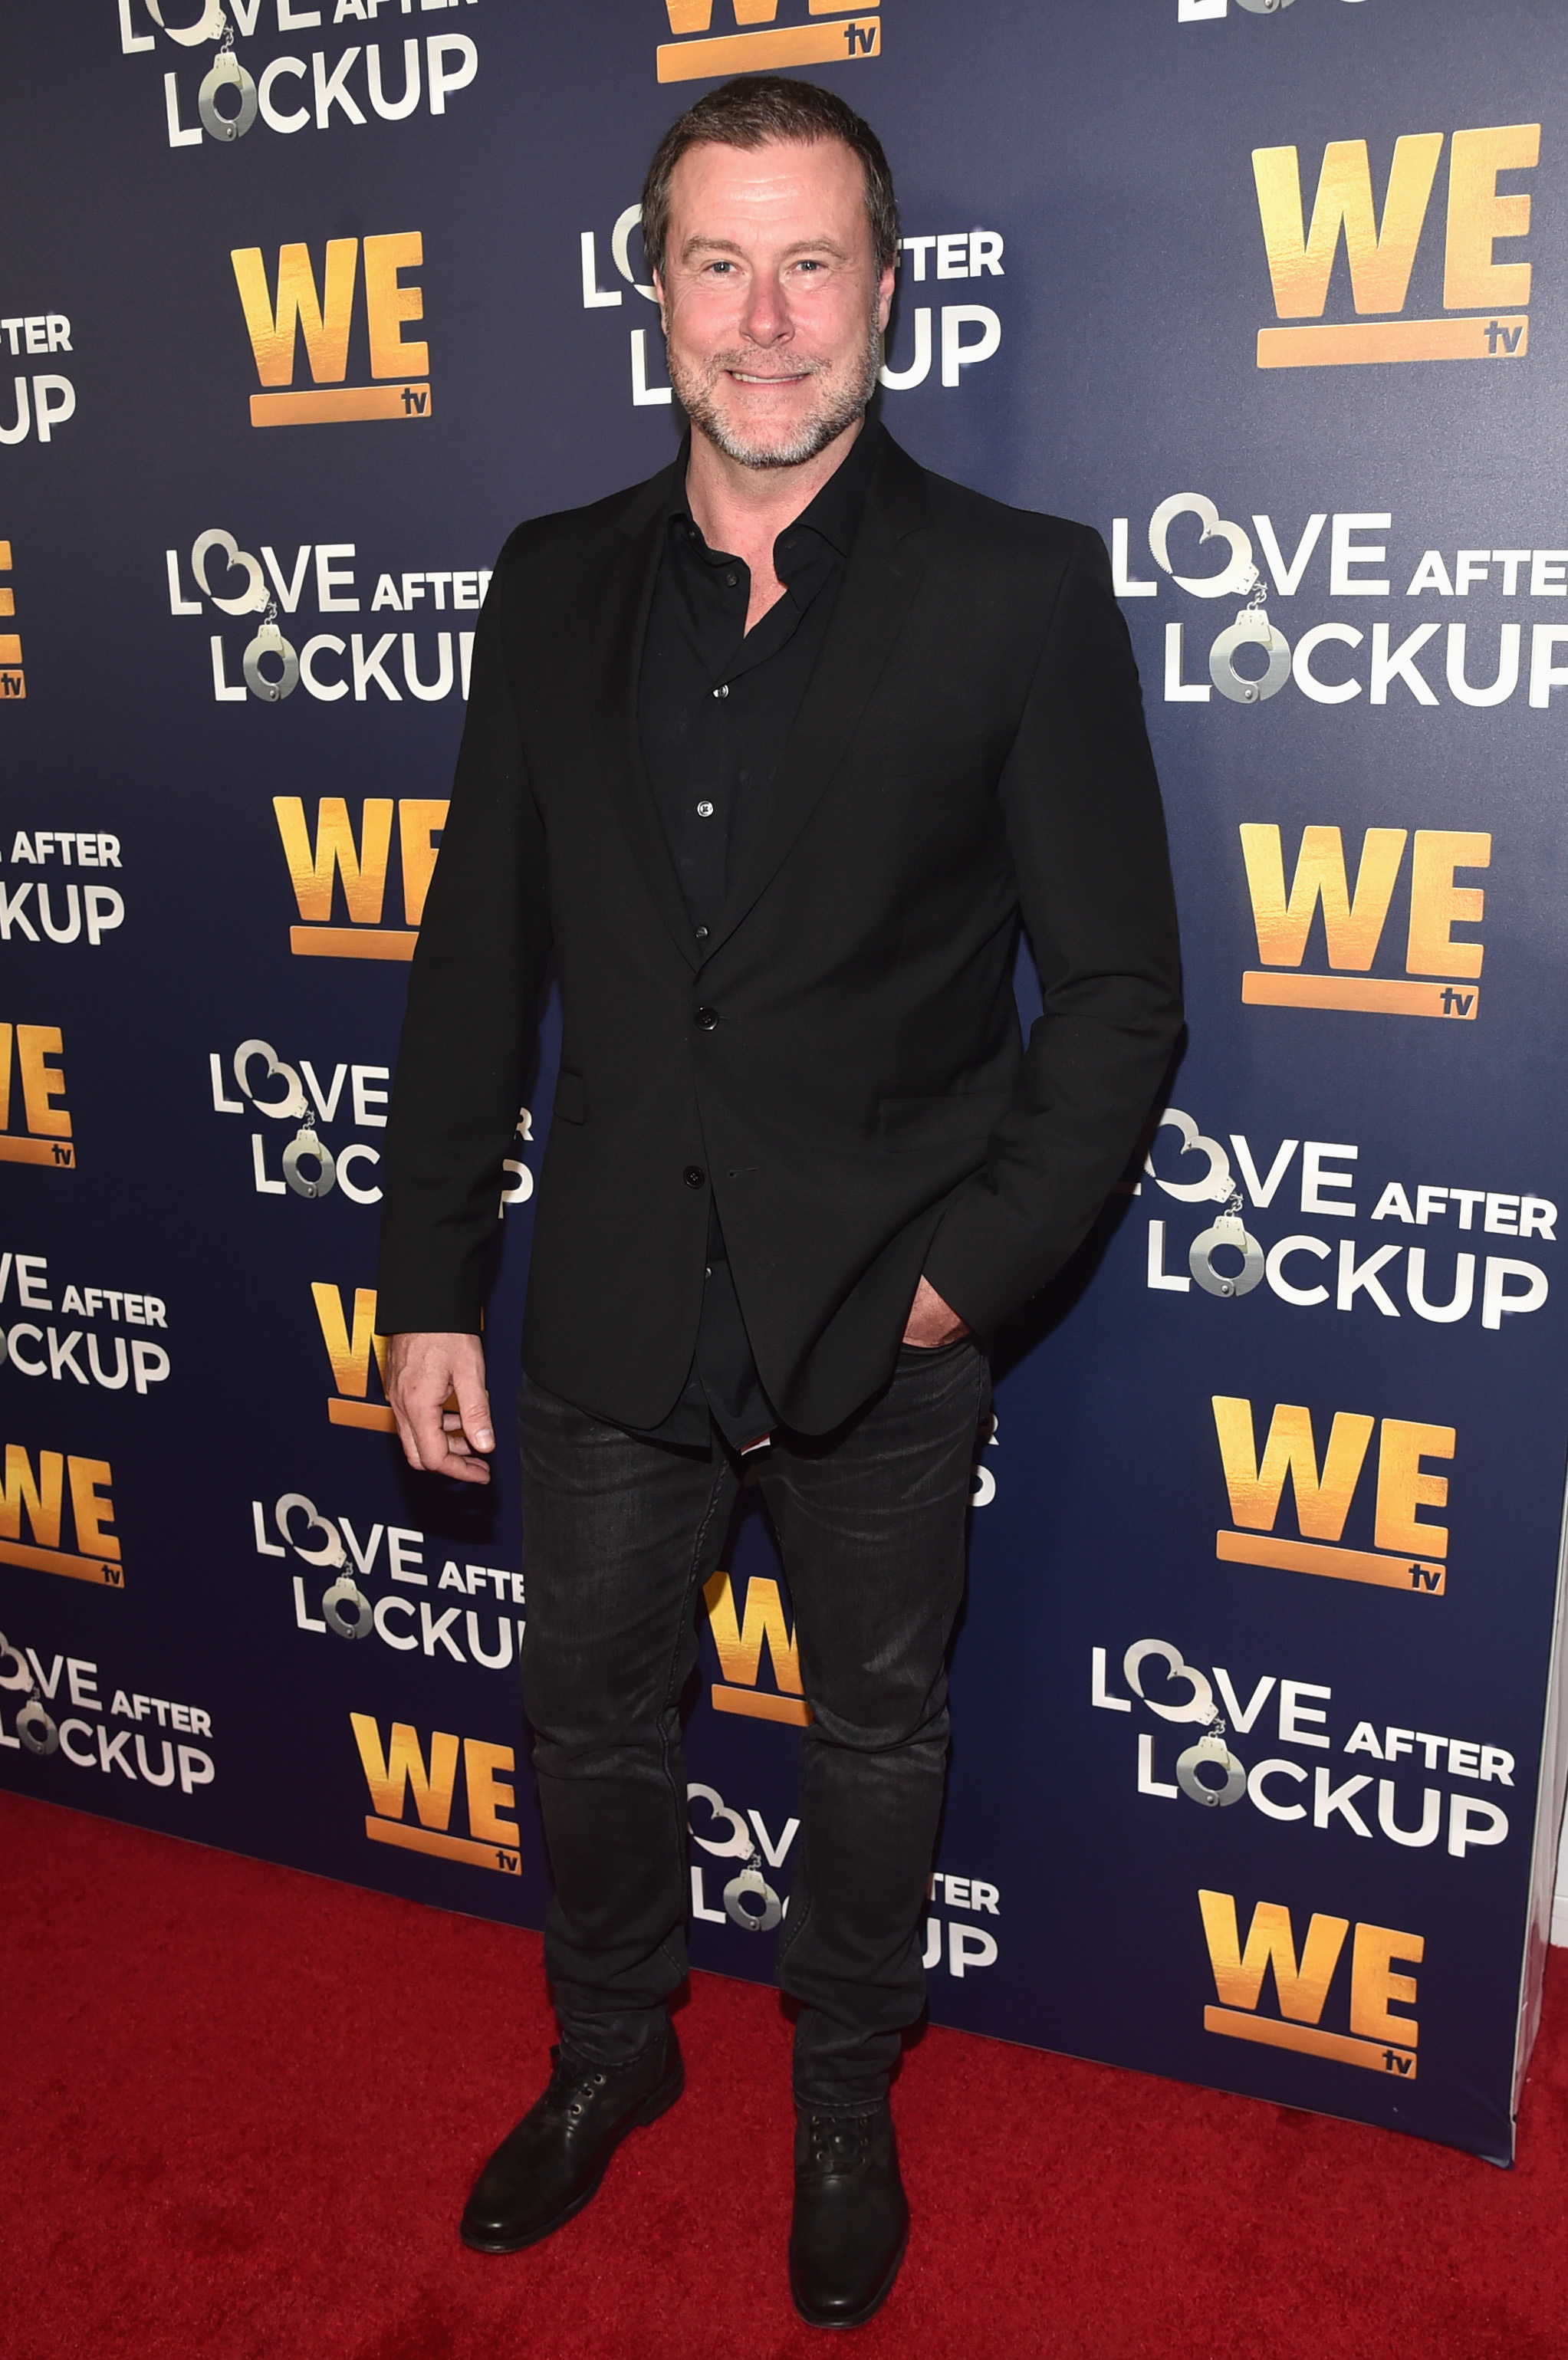 Dean McDermott attends WE tv celebrates the return of "Love After Lockup" with panel, "Real Love: Relationship Reality TV's Past, Present & Future," in Beverly Hills, California, on December 11, 2018. | Source: Getty Images